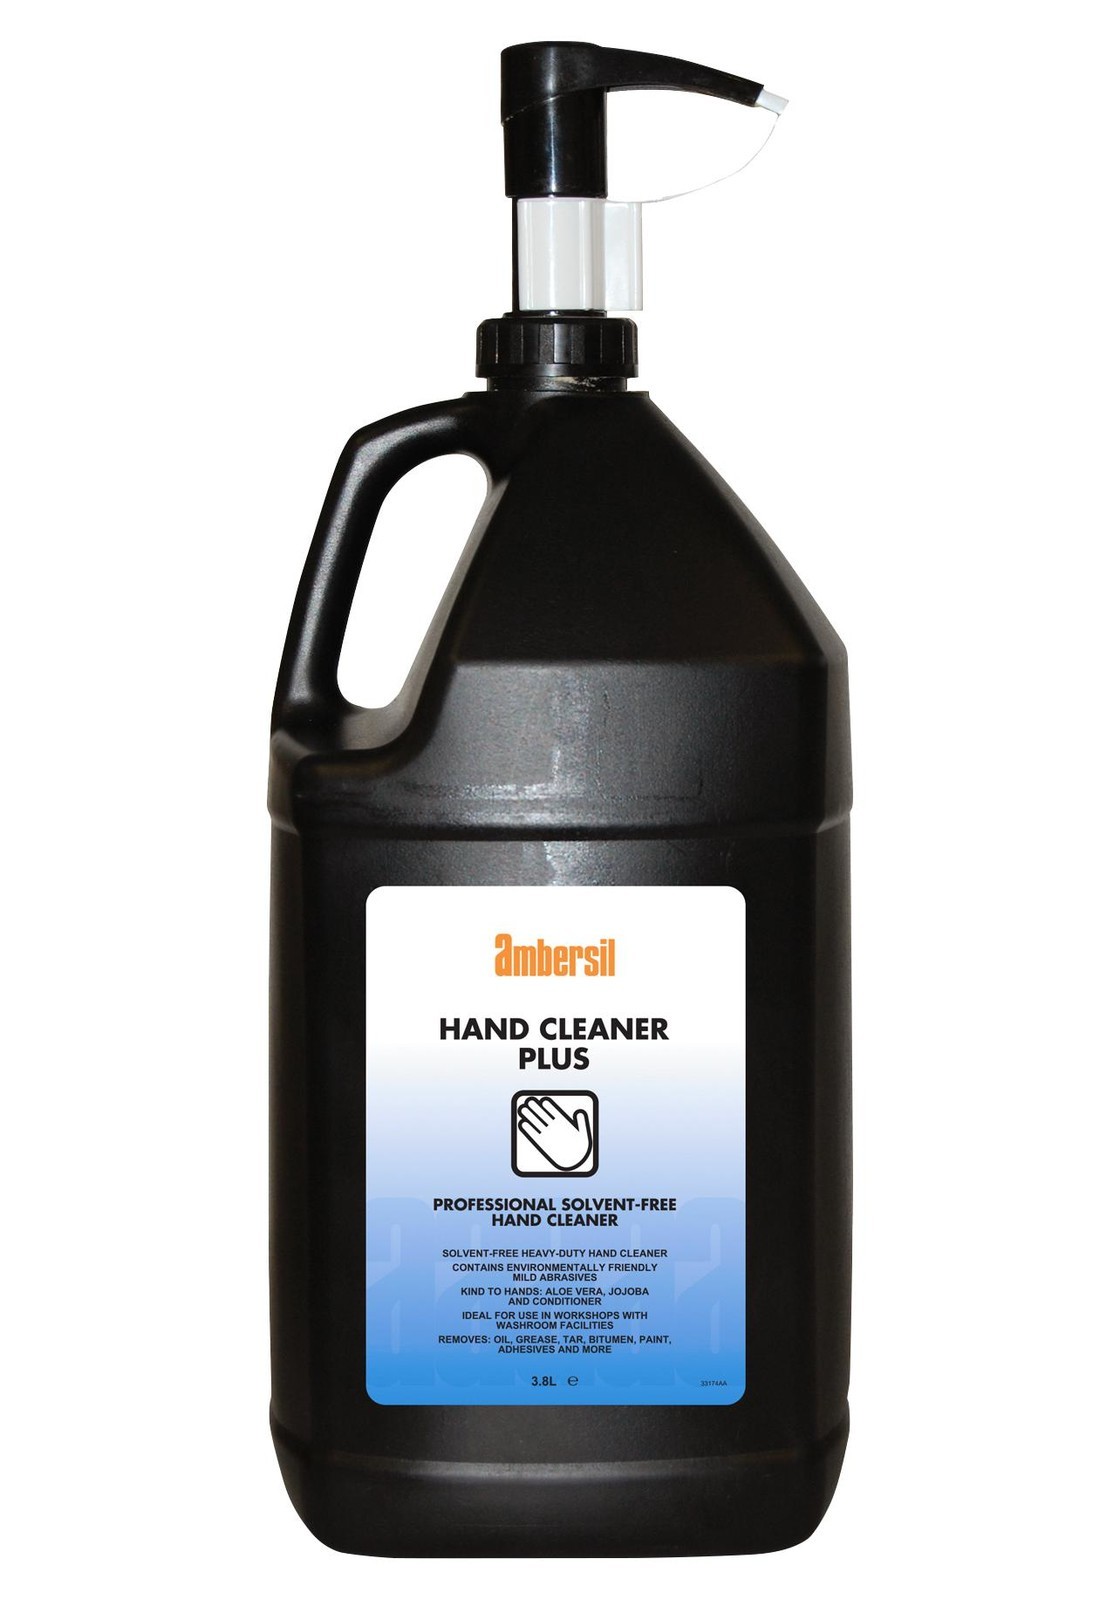 Ambersil Hand Cleaner Plus, 3.8L Cleaner, Metals, Spray Bottle, 3.8L